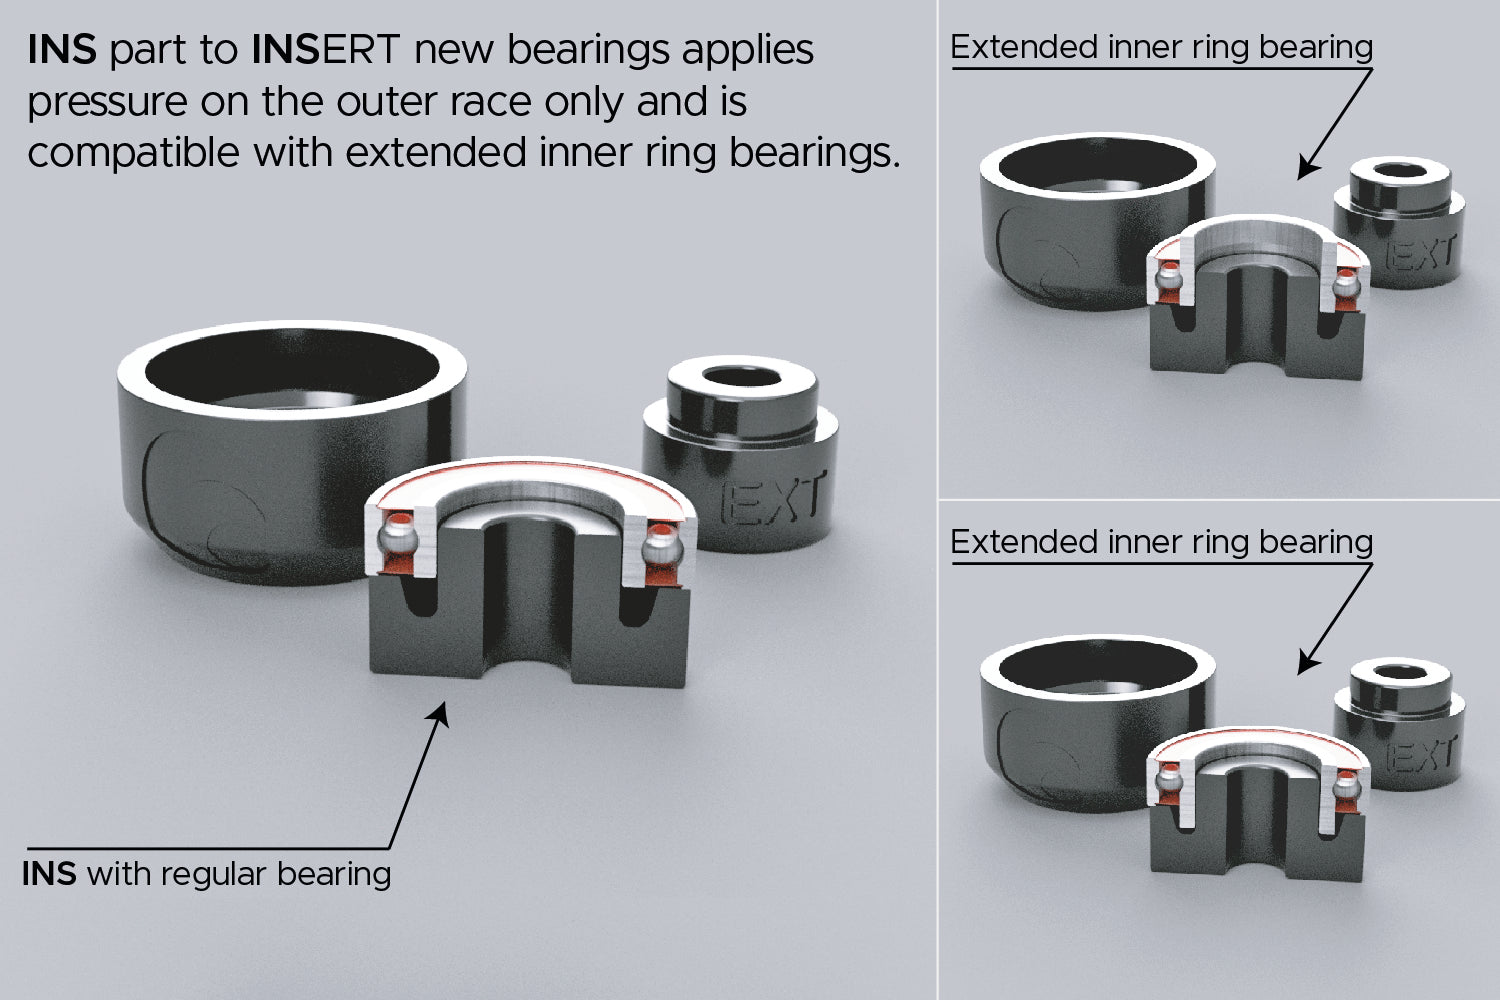 Bearing press kit is compatible with extended inner ring bearings